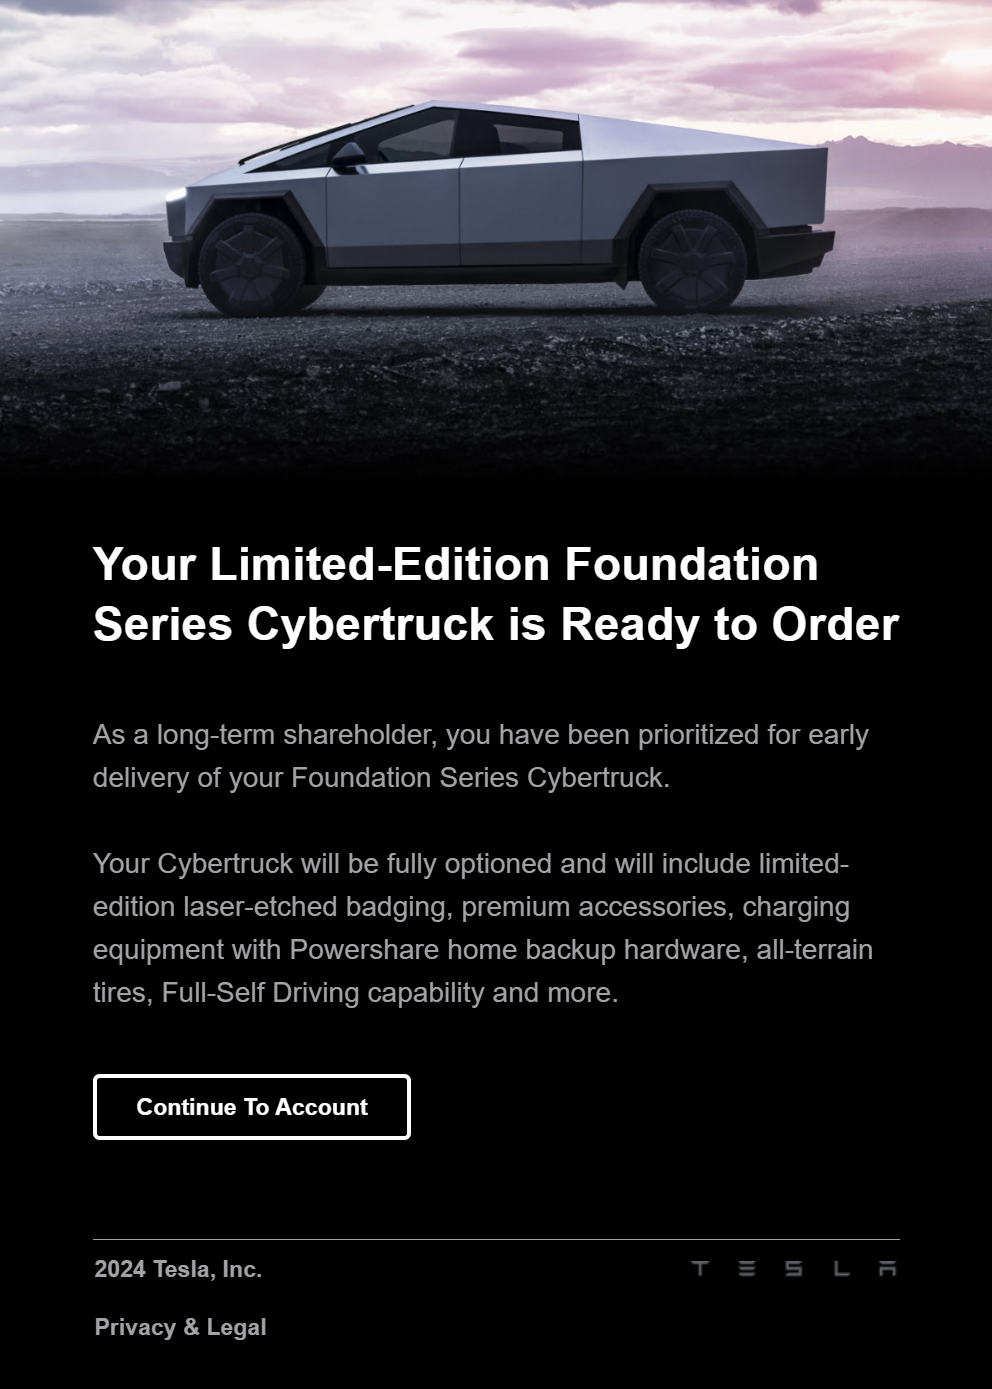 Tesla Cybertruck Early Delivery for long-term shareholders - eligibility confirmation emails now arriving! Get yours?! 📬 1715384651022-7w